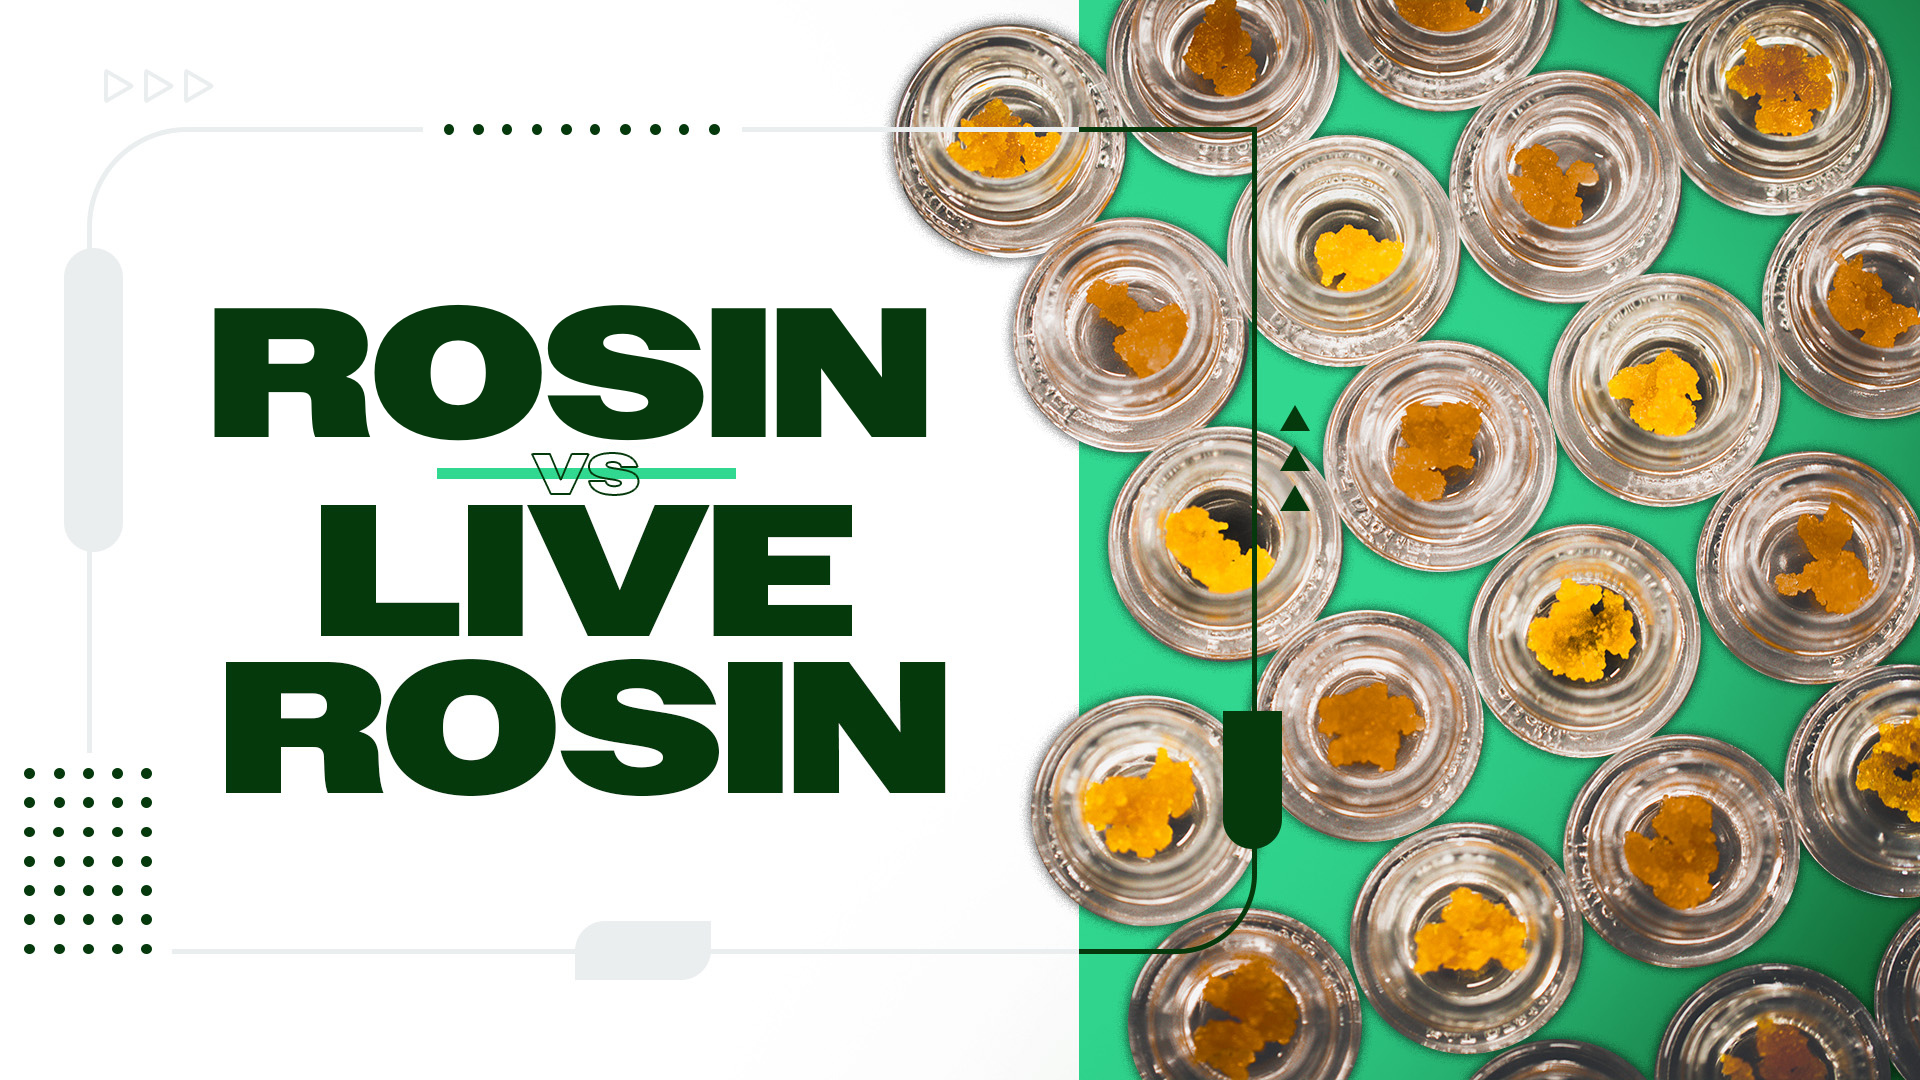 Live Rosin vs. Rosin: Differences and Effects Explained